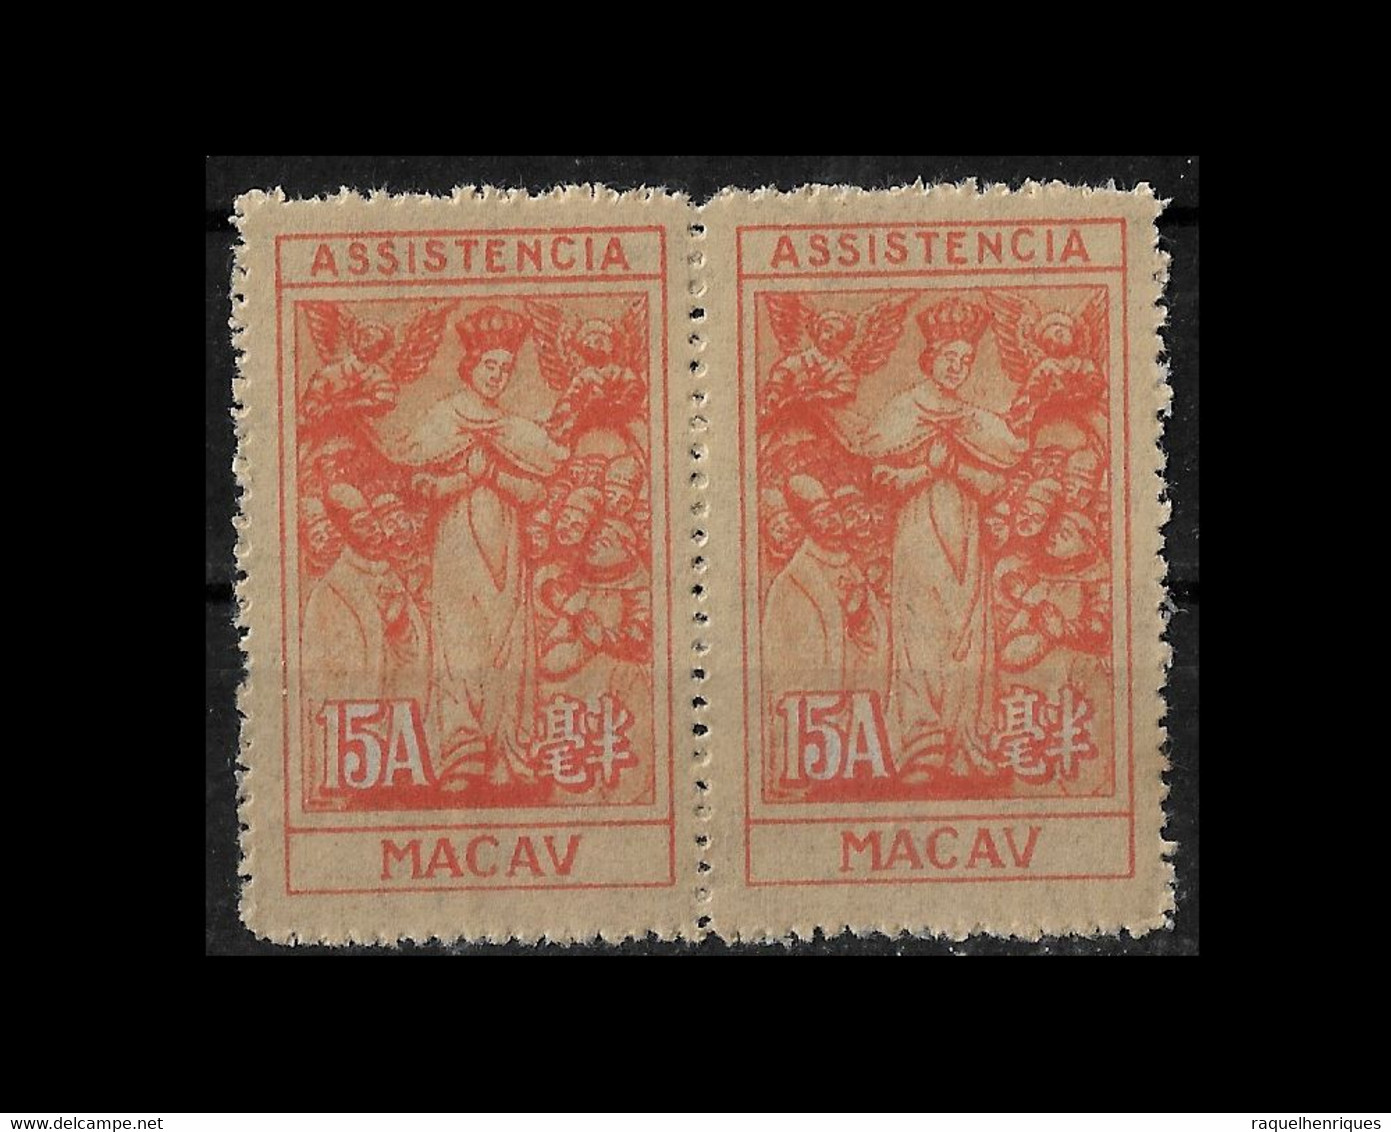 MACAU STAMP - 1945-47 Symbol Of Charity - Inscription "ASSISTENCIA" Perf:11 PAIR MNH (BA5#319) - Timbres-taxe